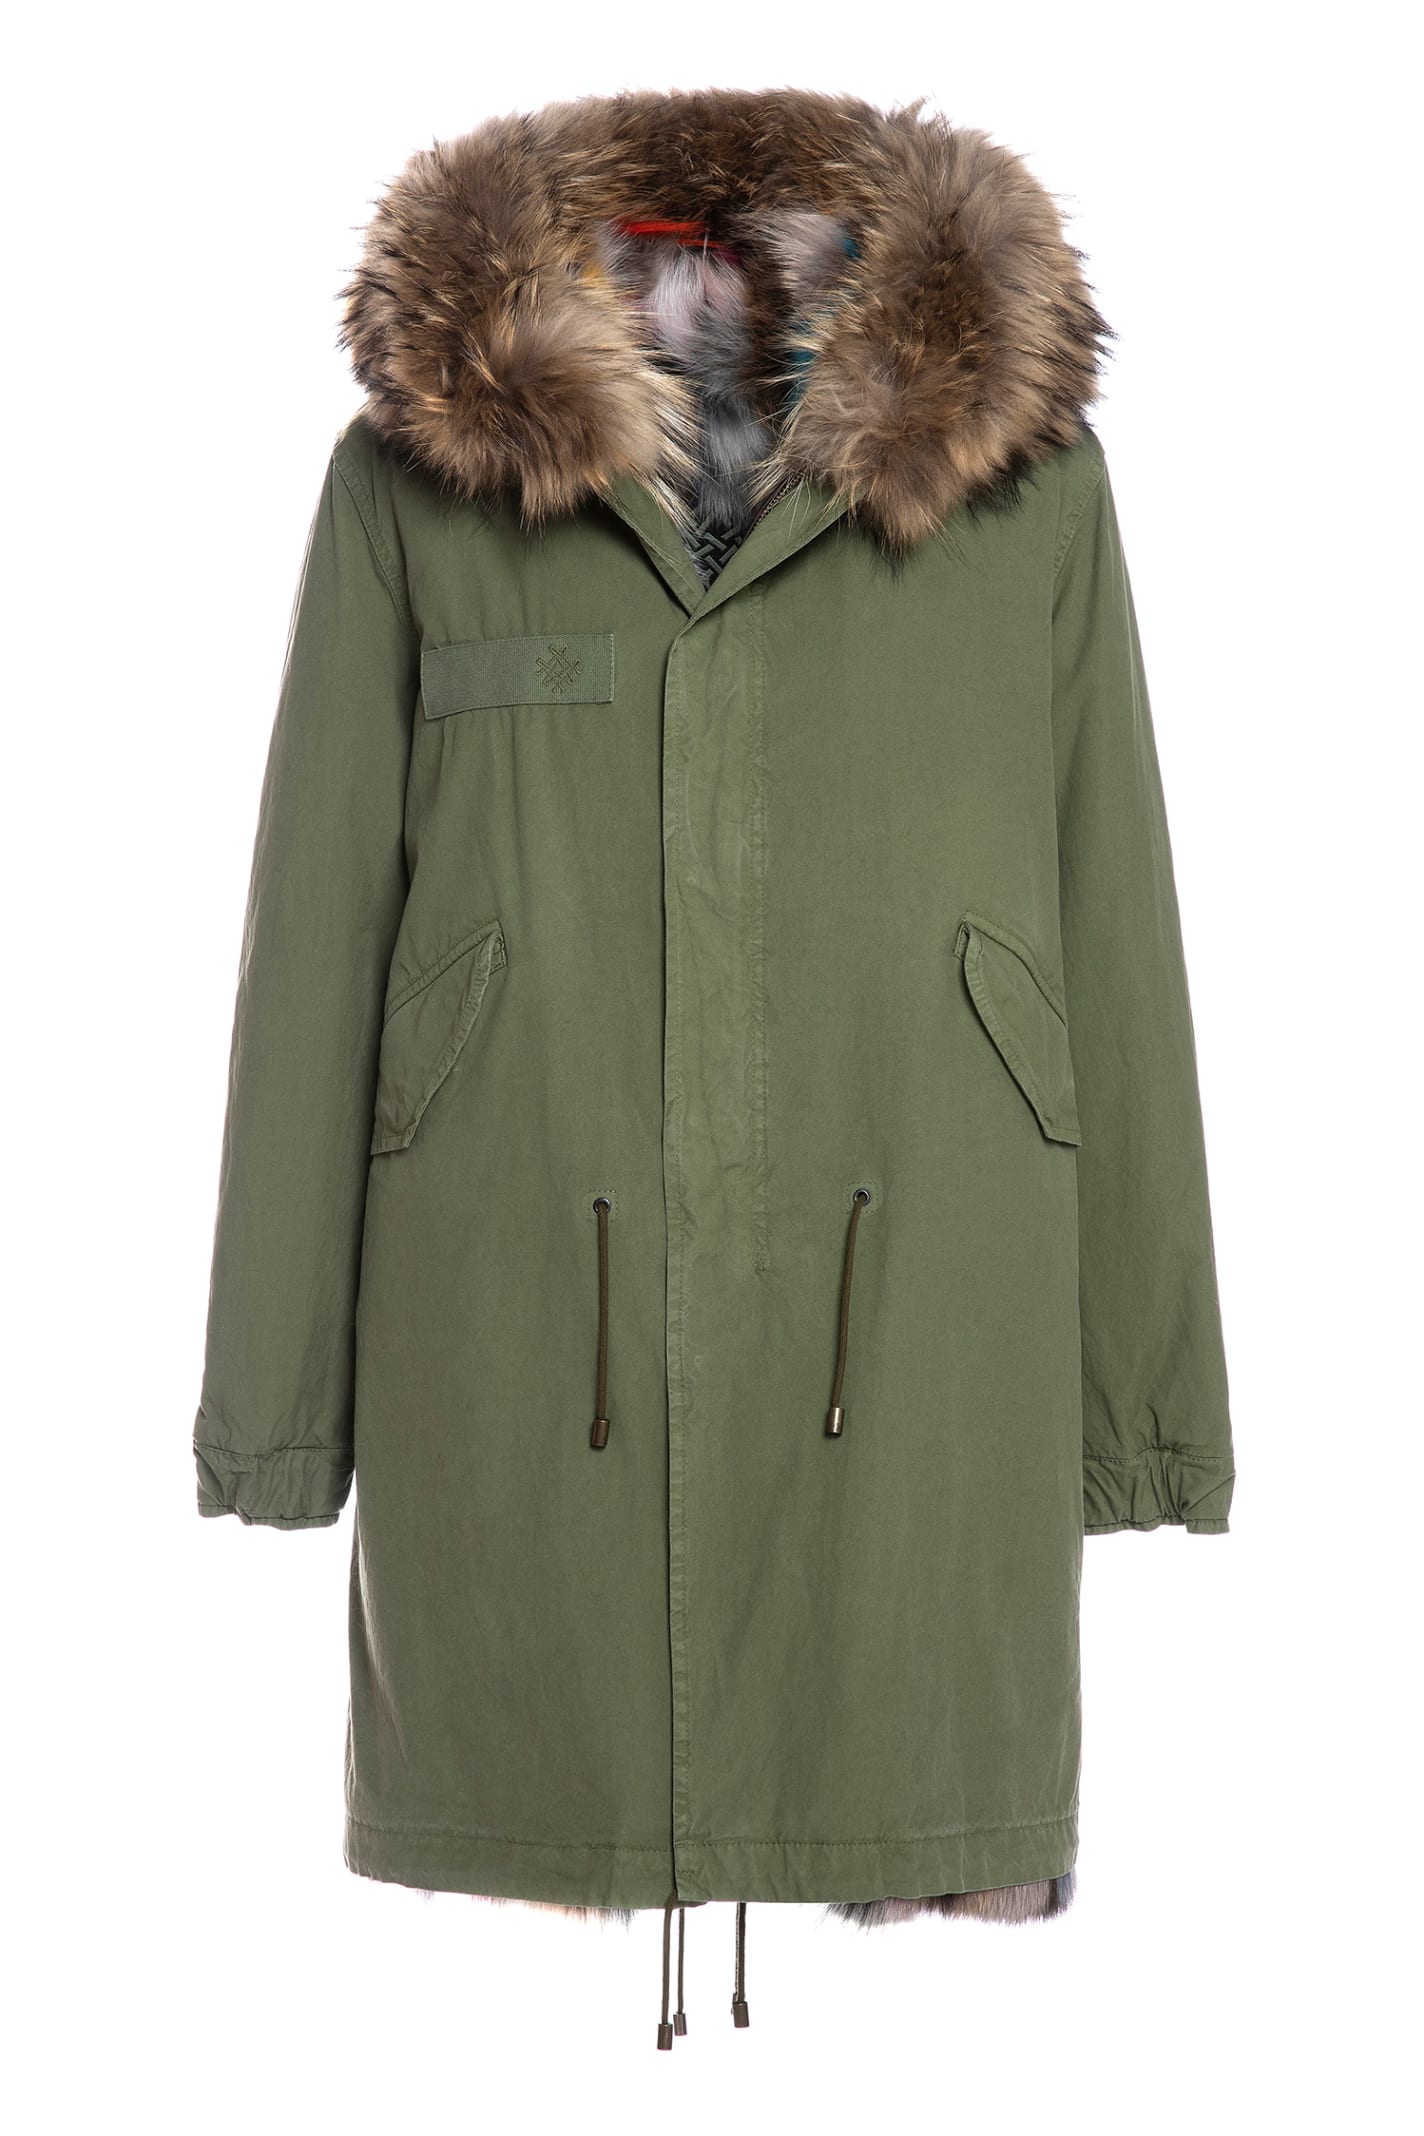 Mr & Mrs Italy Exclusive Fw20 Icon Parka: Army Cotton Canvas Parka With Patch Fox Fur Lining